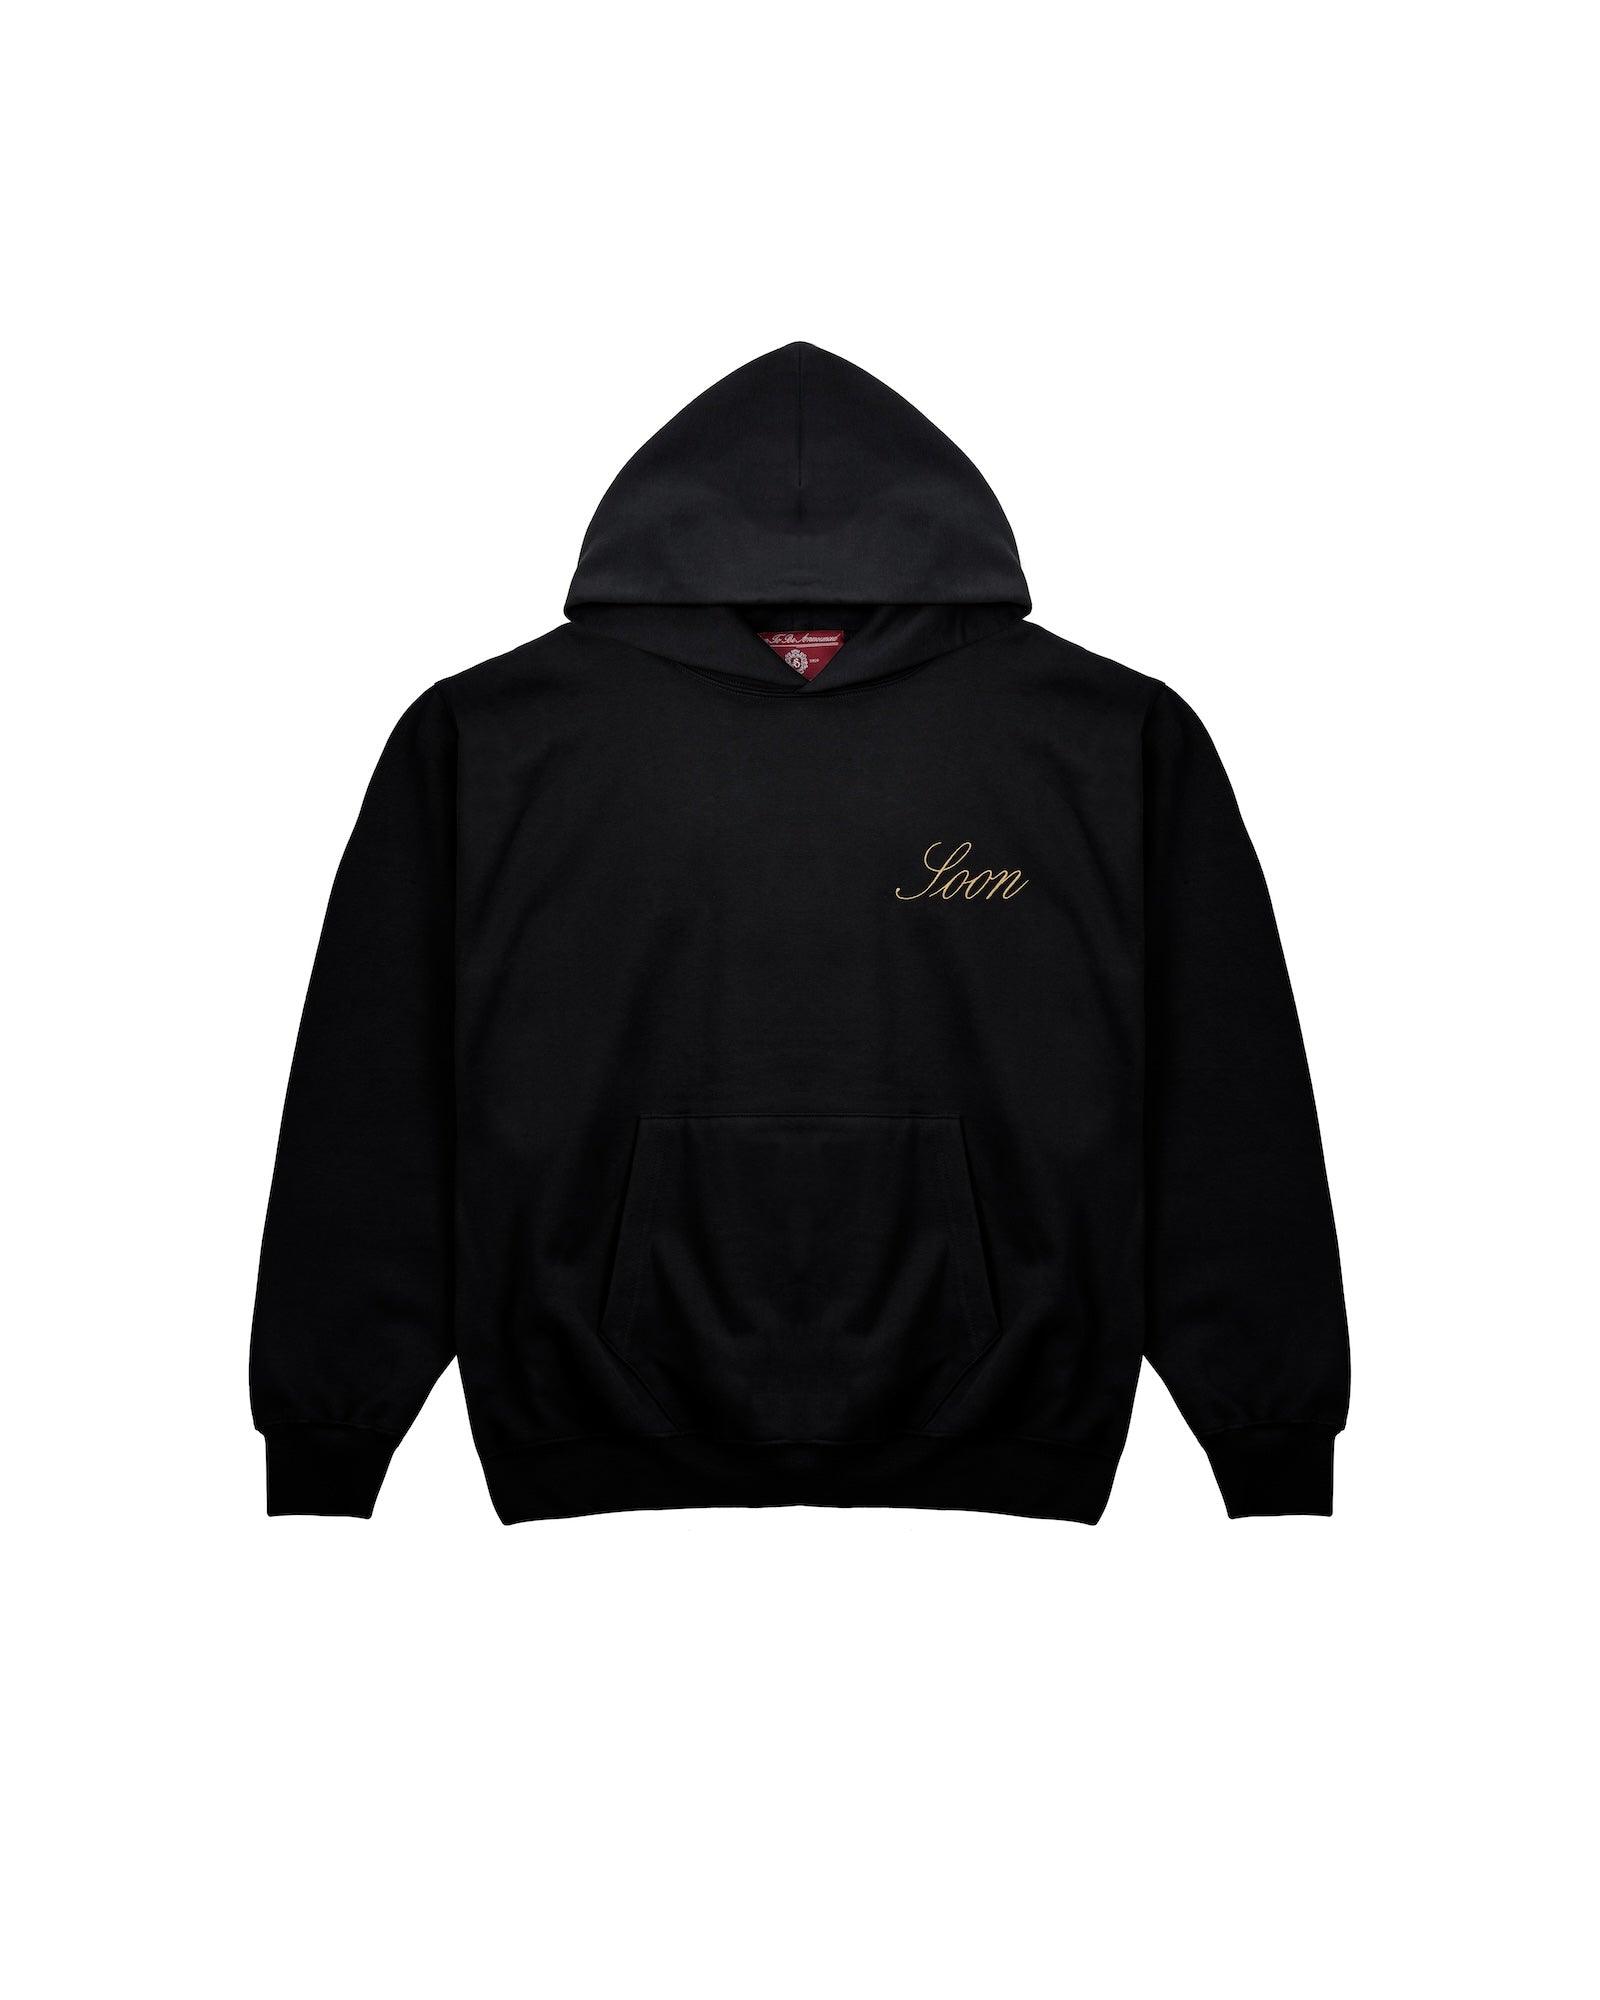 Soon Embroidery Hoodie - SOON TO BE ANNOUNCED